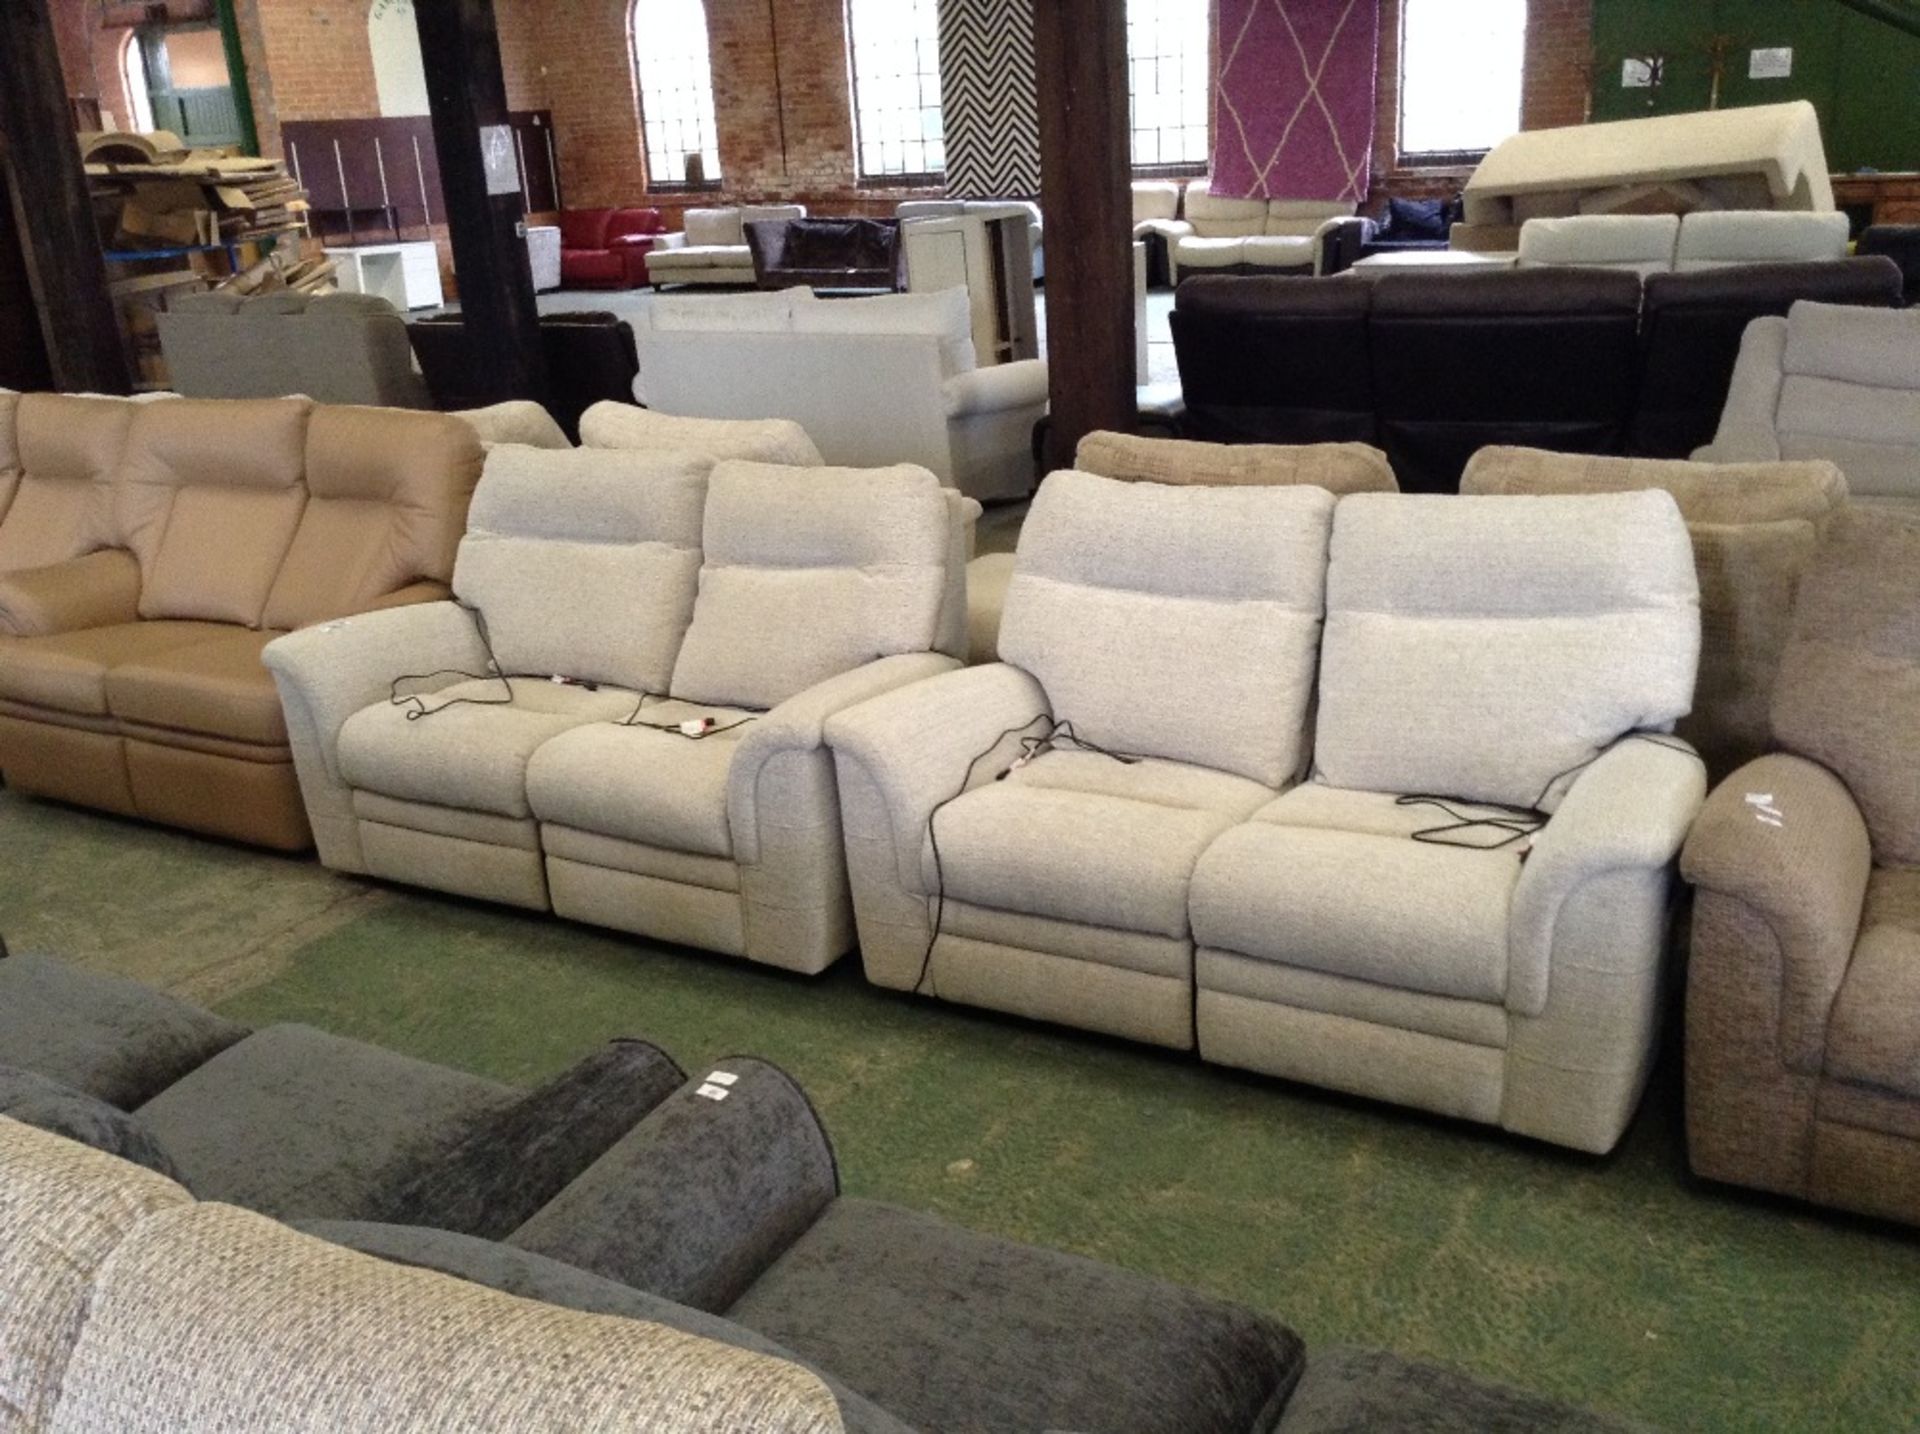 2 x NATURAL PATTERNED ELECTRIC RECLINING 2 SEATER